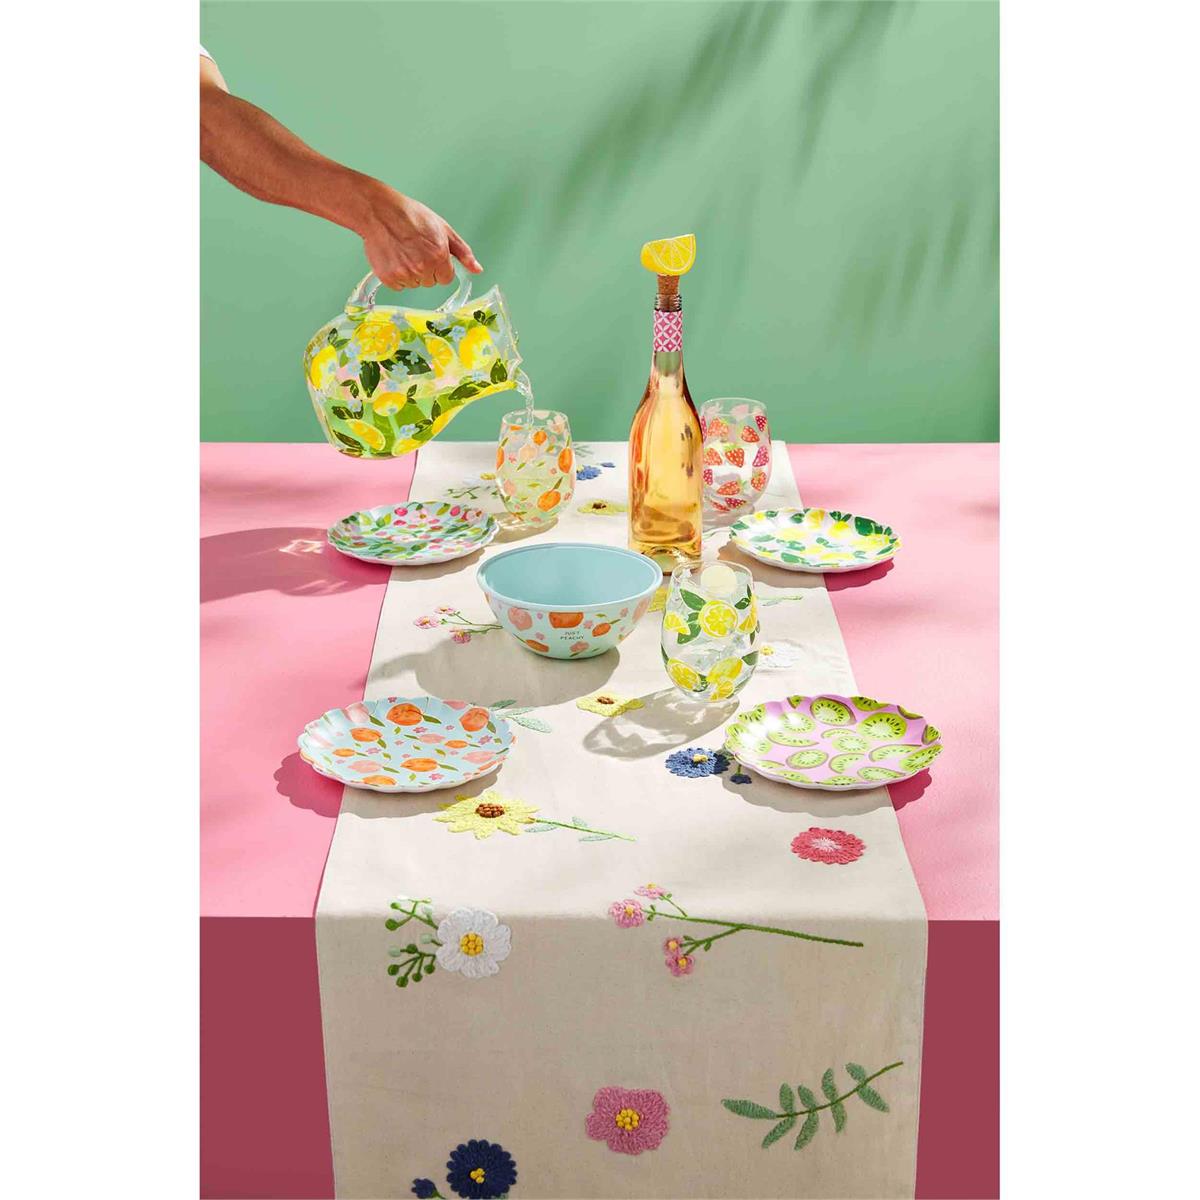 bloom table runner displayed on on a table with plates, bowl, and glasses being filled by a person